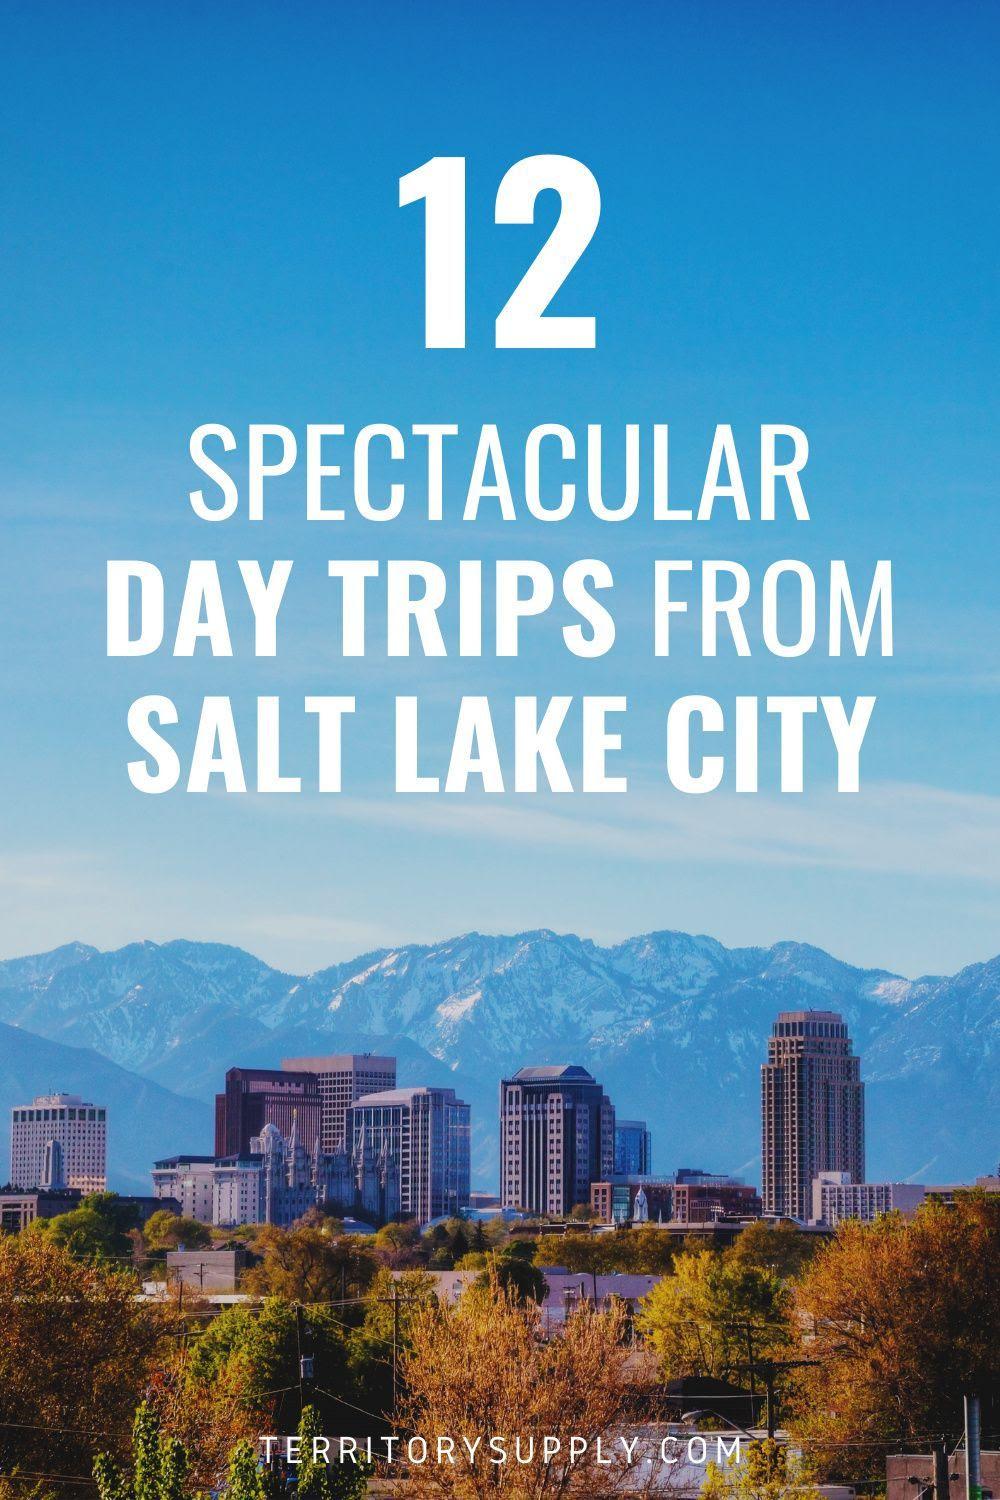 12 Spectacular Day Trips from Salt Lake City, Utah in 2021 Day trips